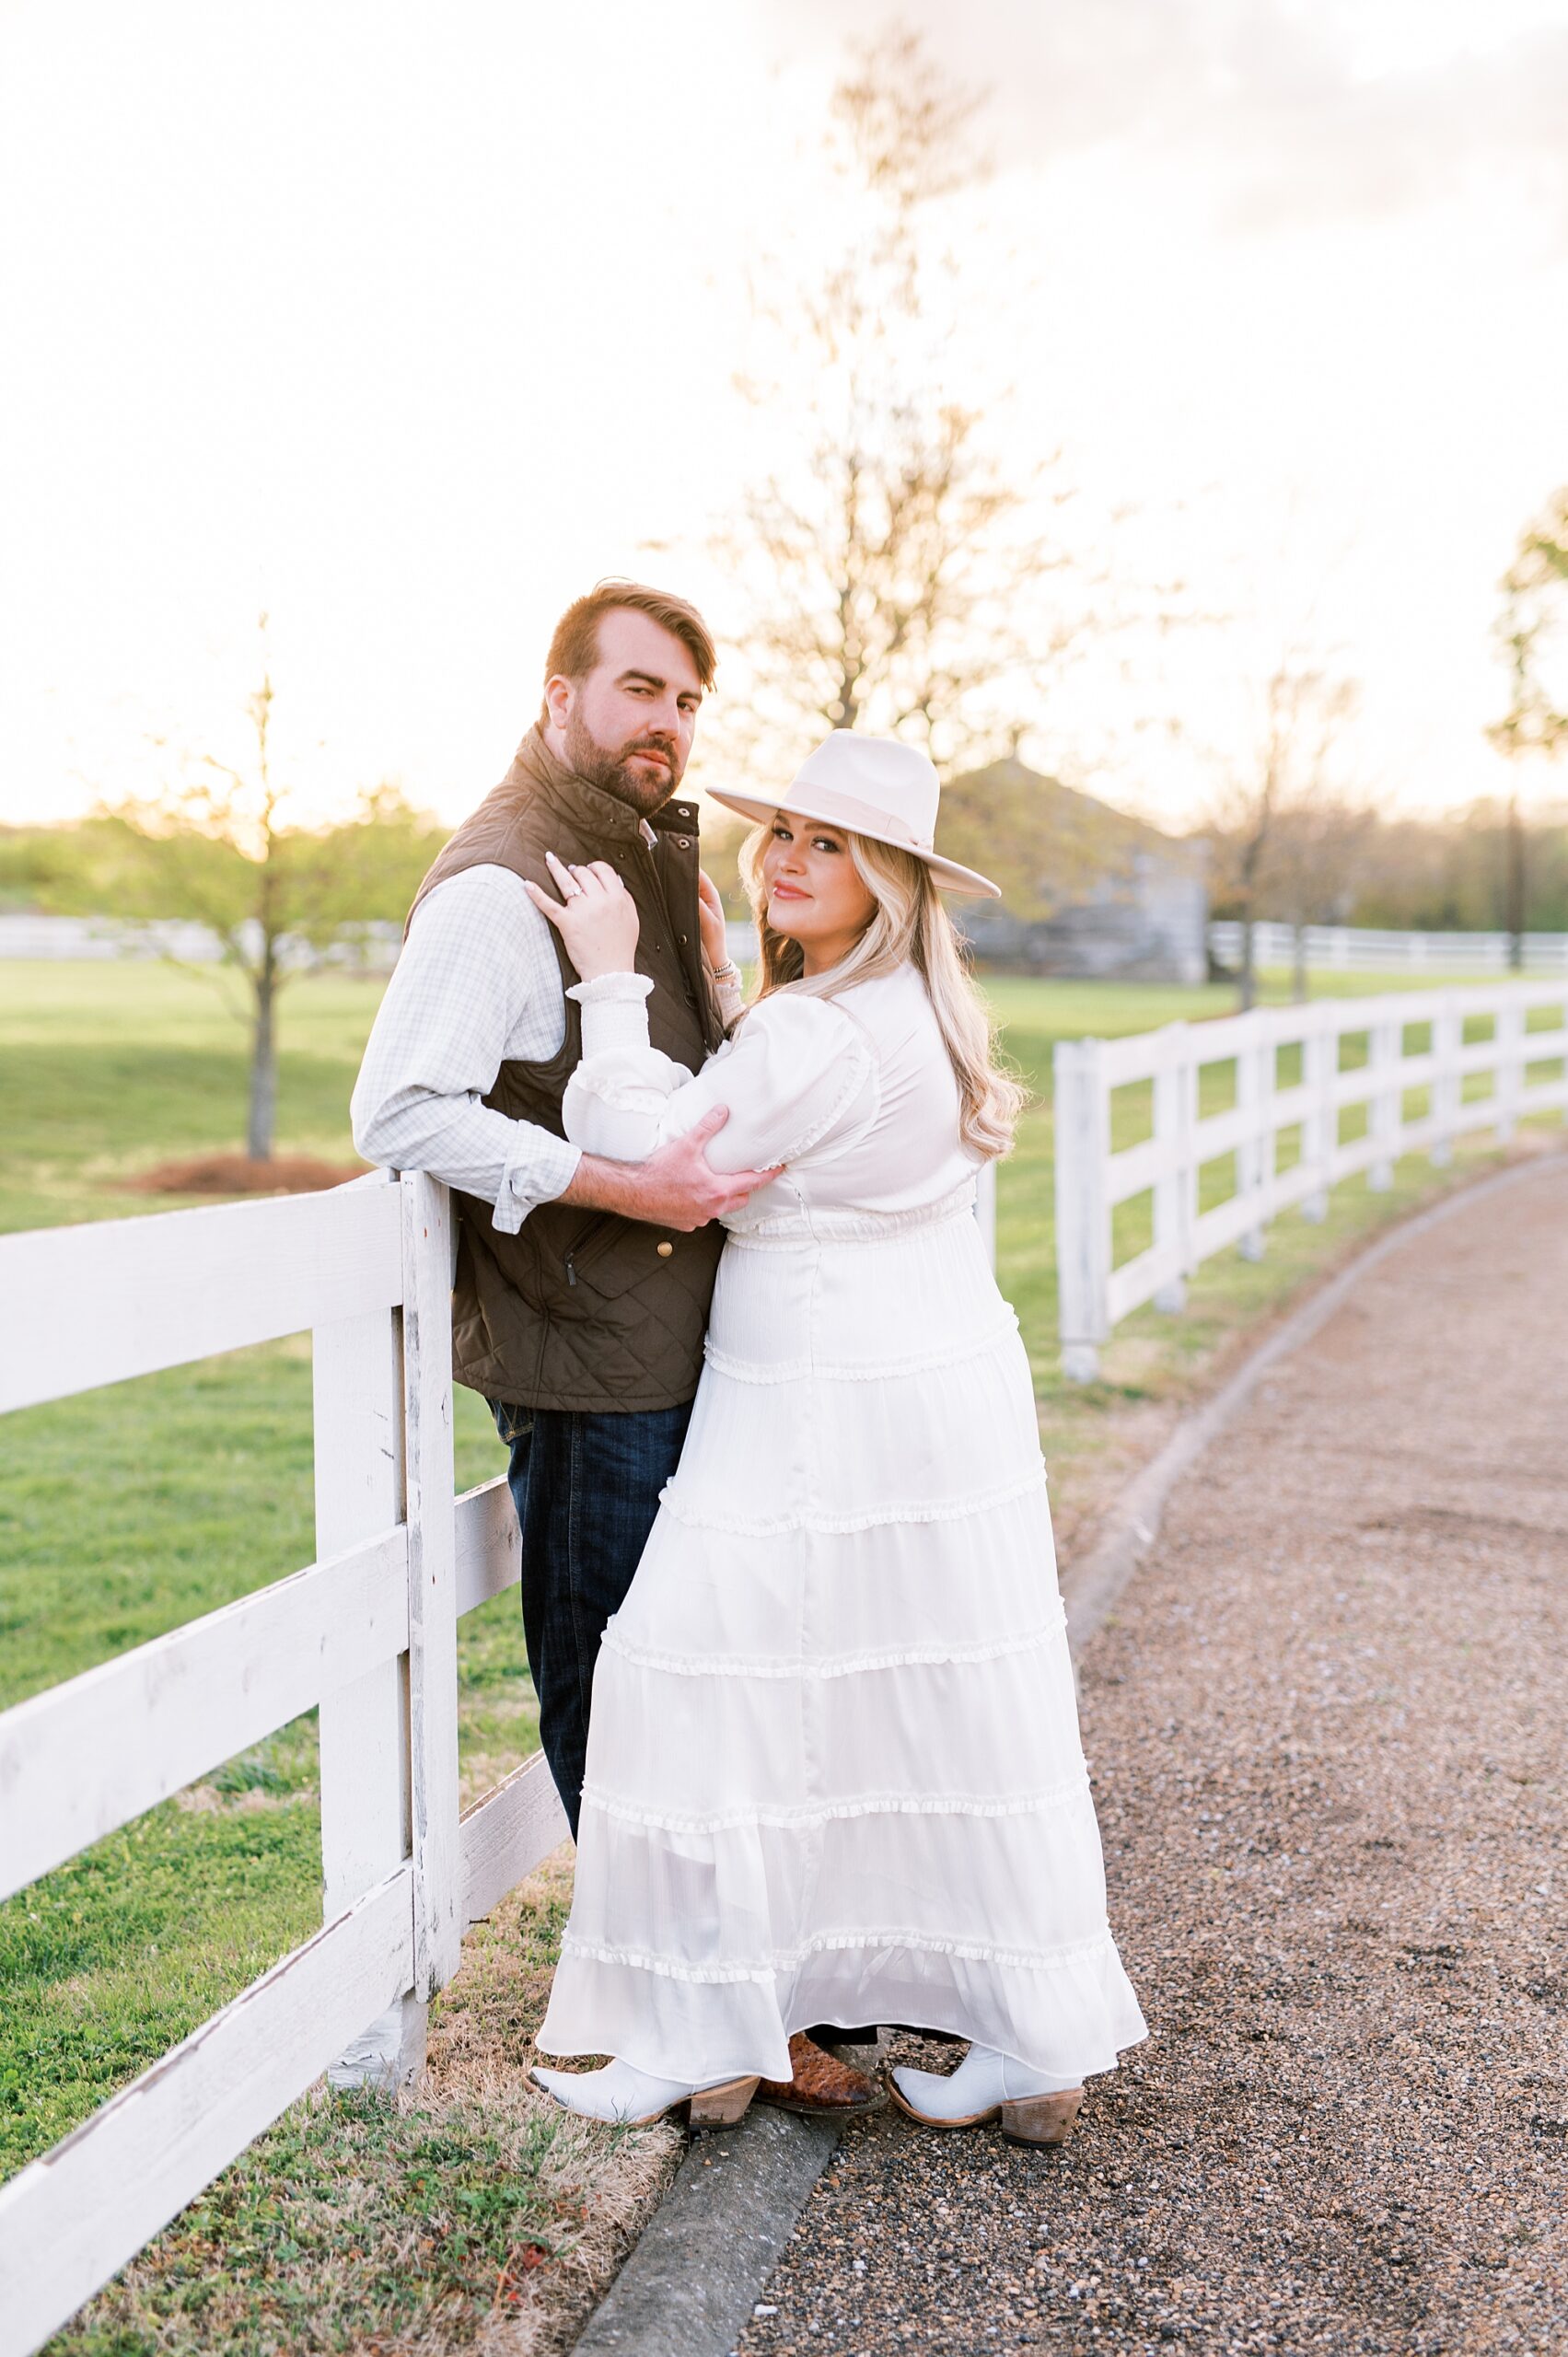 romantic sunset portaits from intimate downtown Franklin session